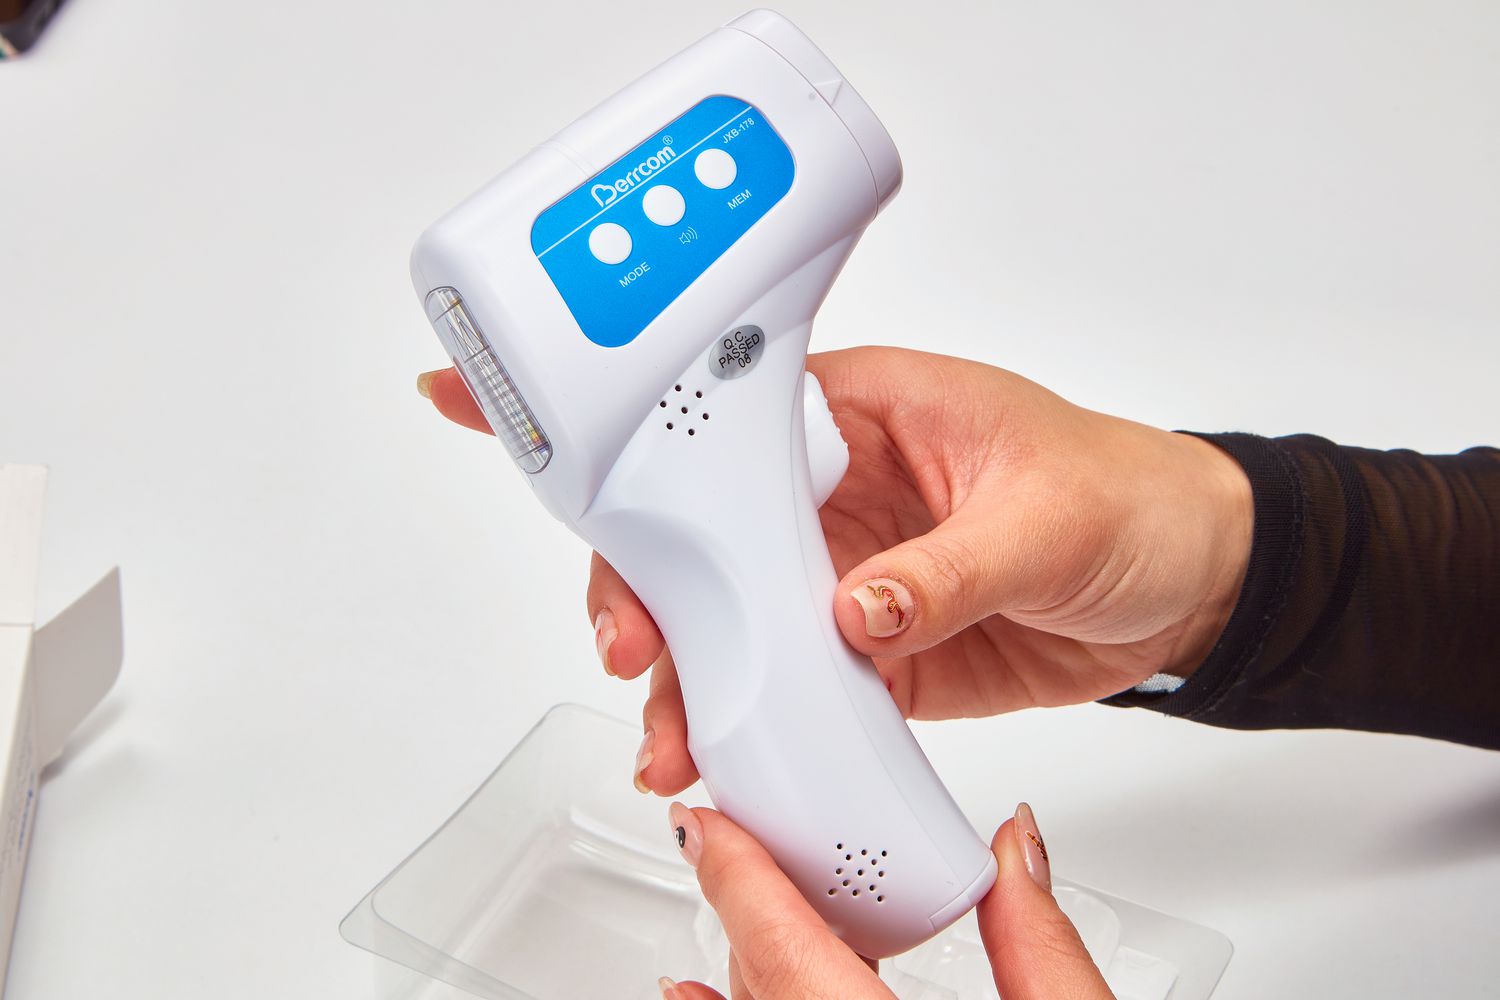 Berrcom Non Contact Infrared Forehead Thermometer